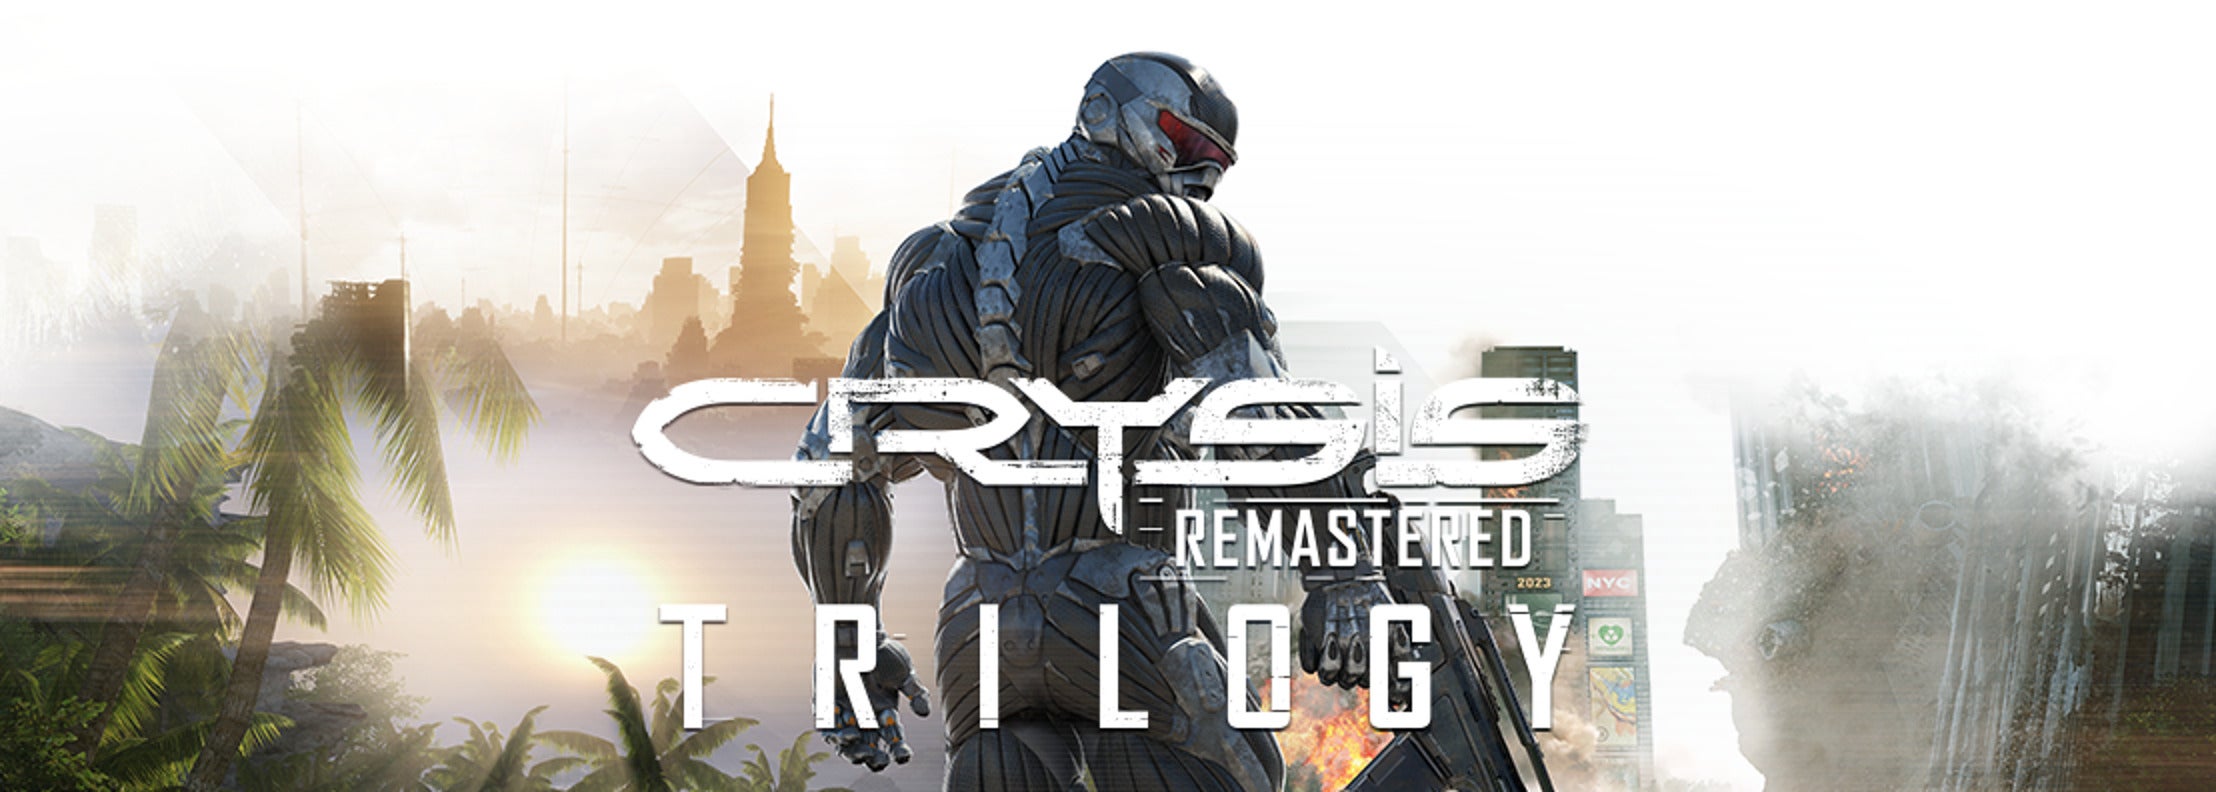 Image for Crysis Remastered Trilogy gets a release date